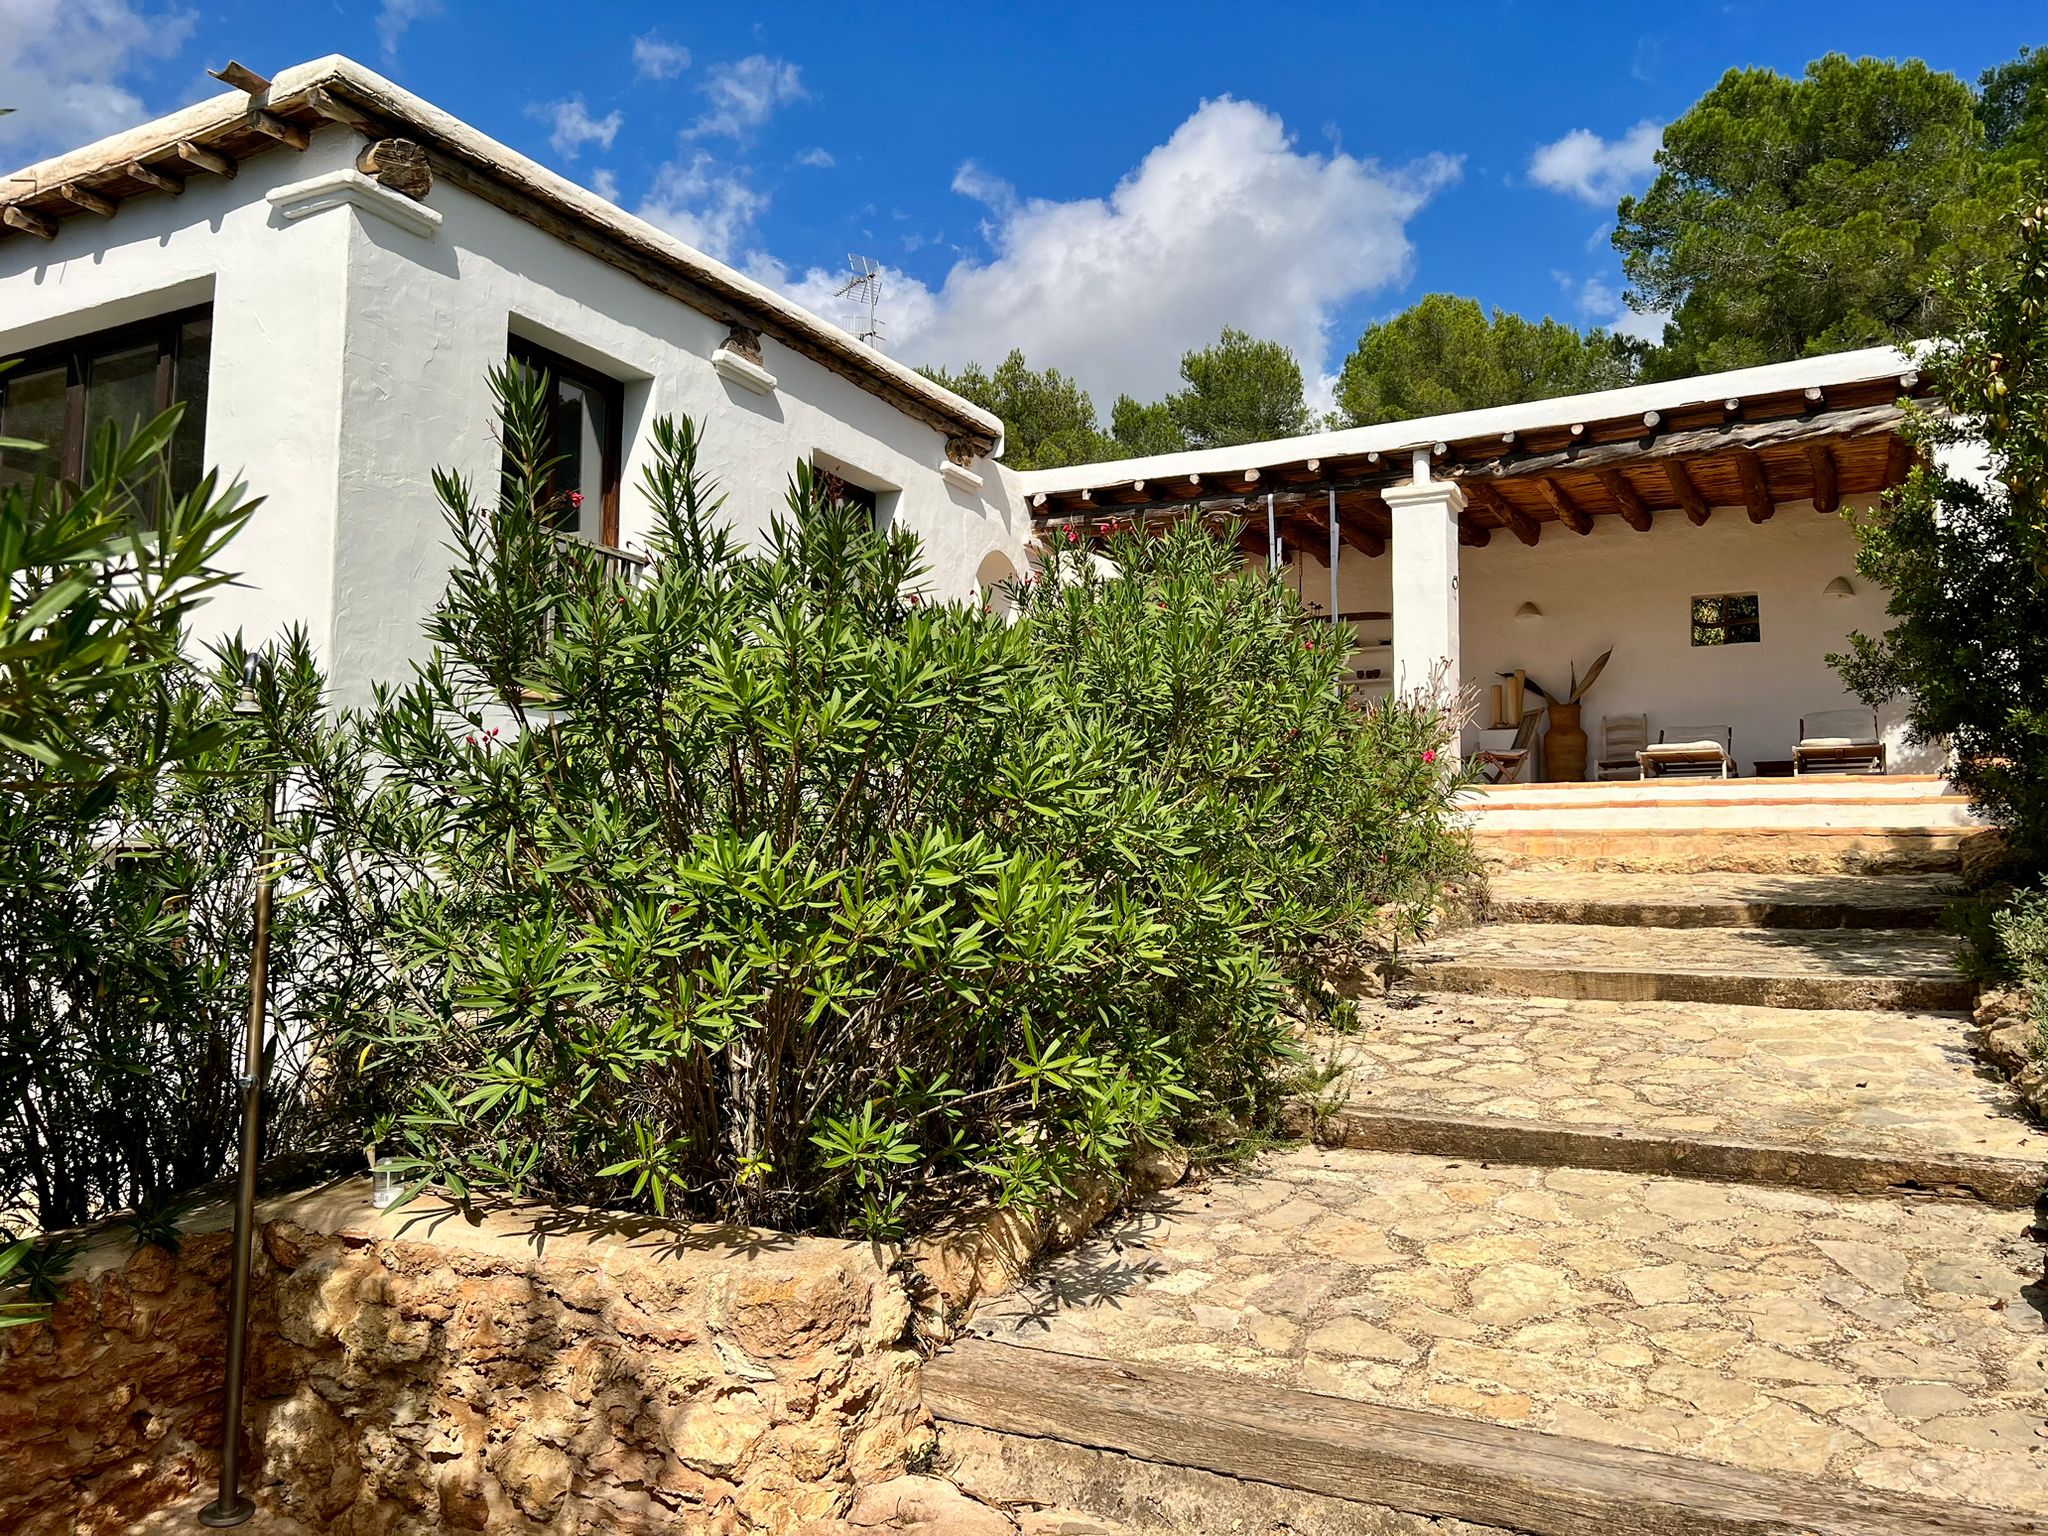 Finca with 6 bedrooms located on the bank of the torrent of cala Jondal